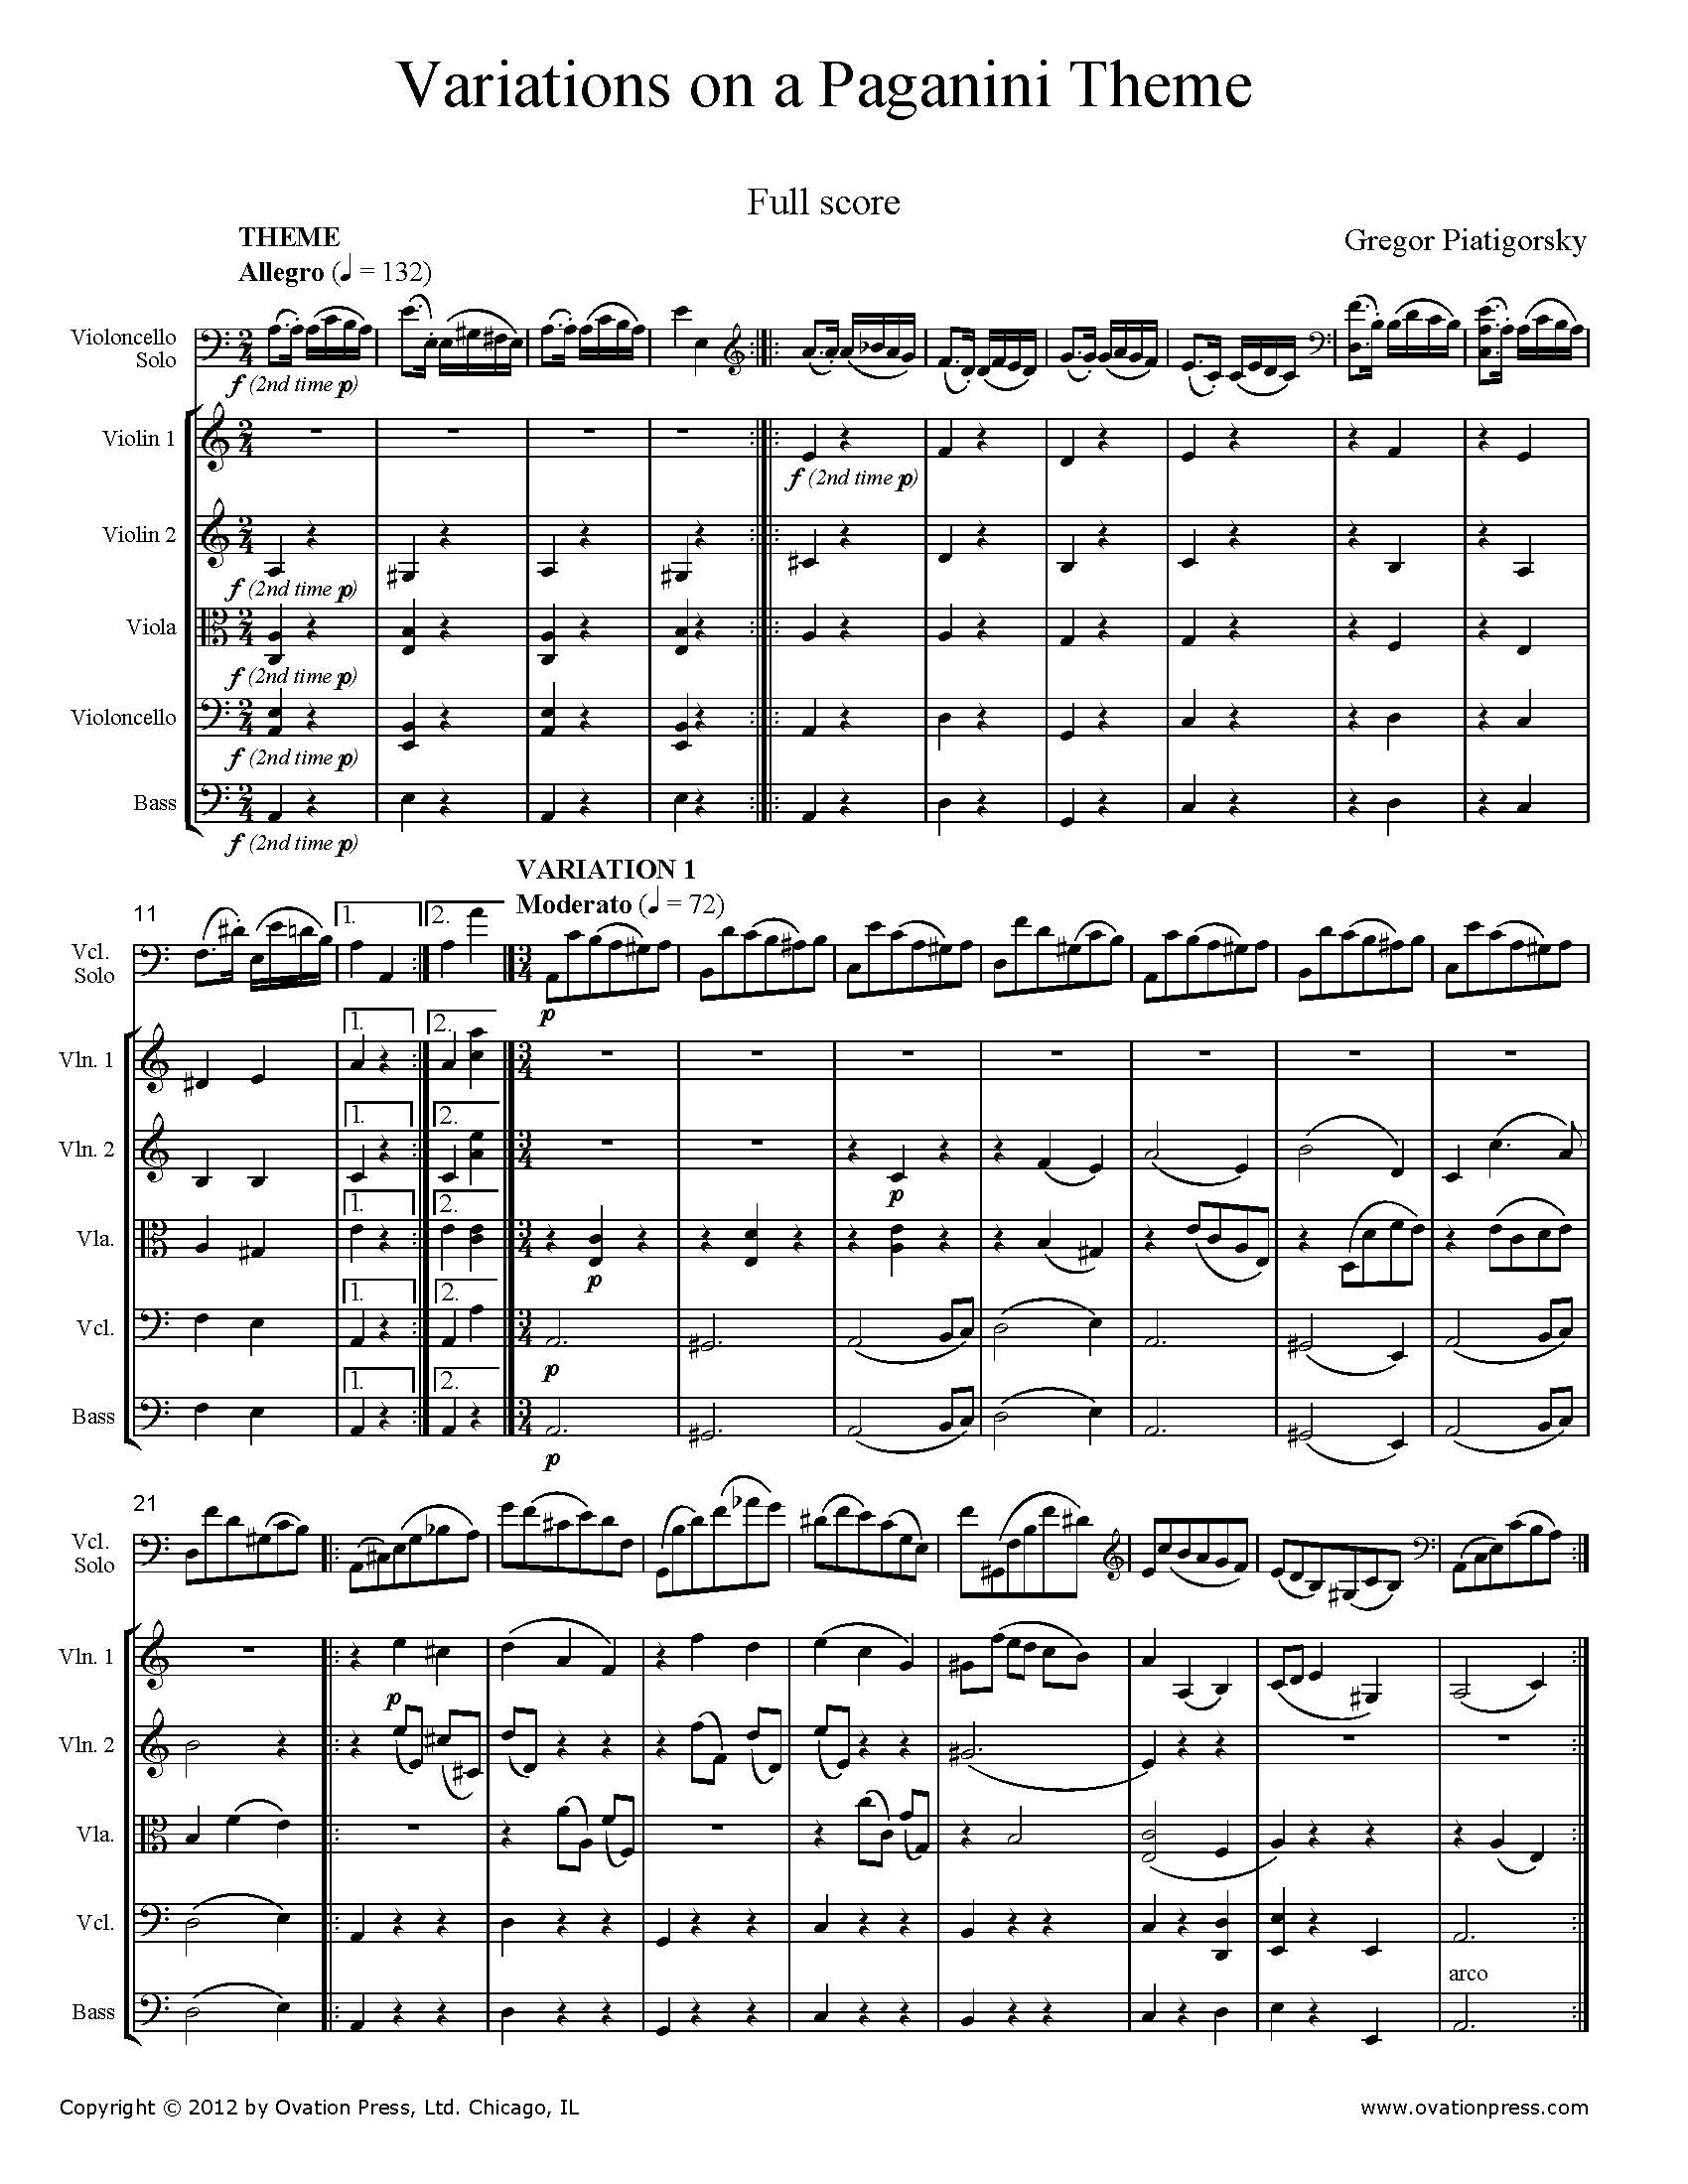 Piatigorsky Variations on a Paganini Theme arr. for Cello and String Orchestra